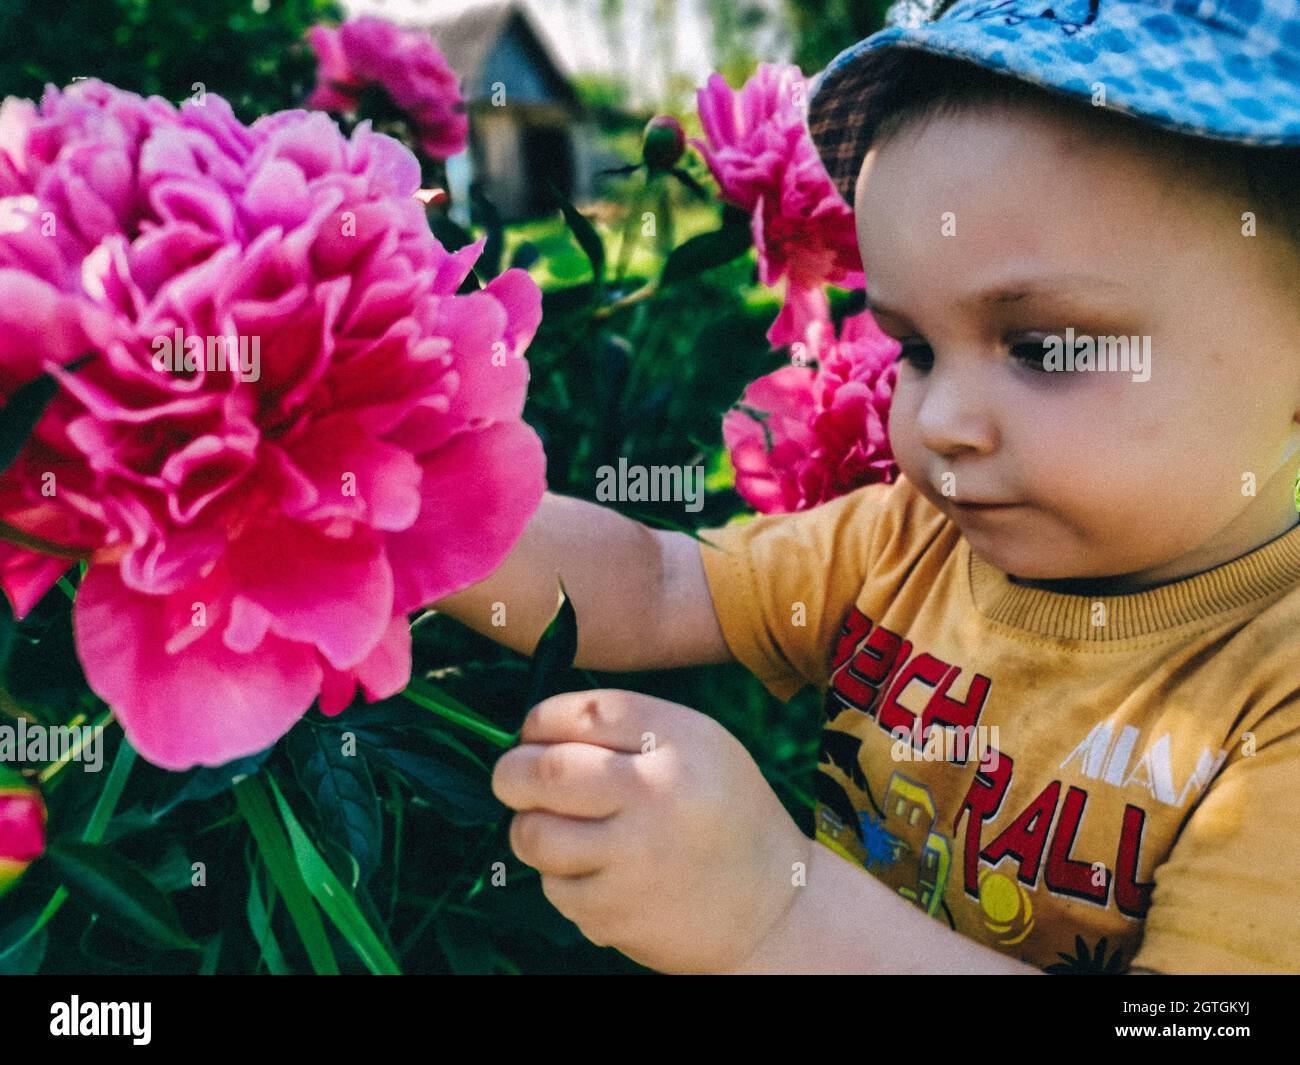 Close-up Portrait Of Boy With Pink Flowers Stock Photo